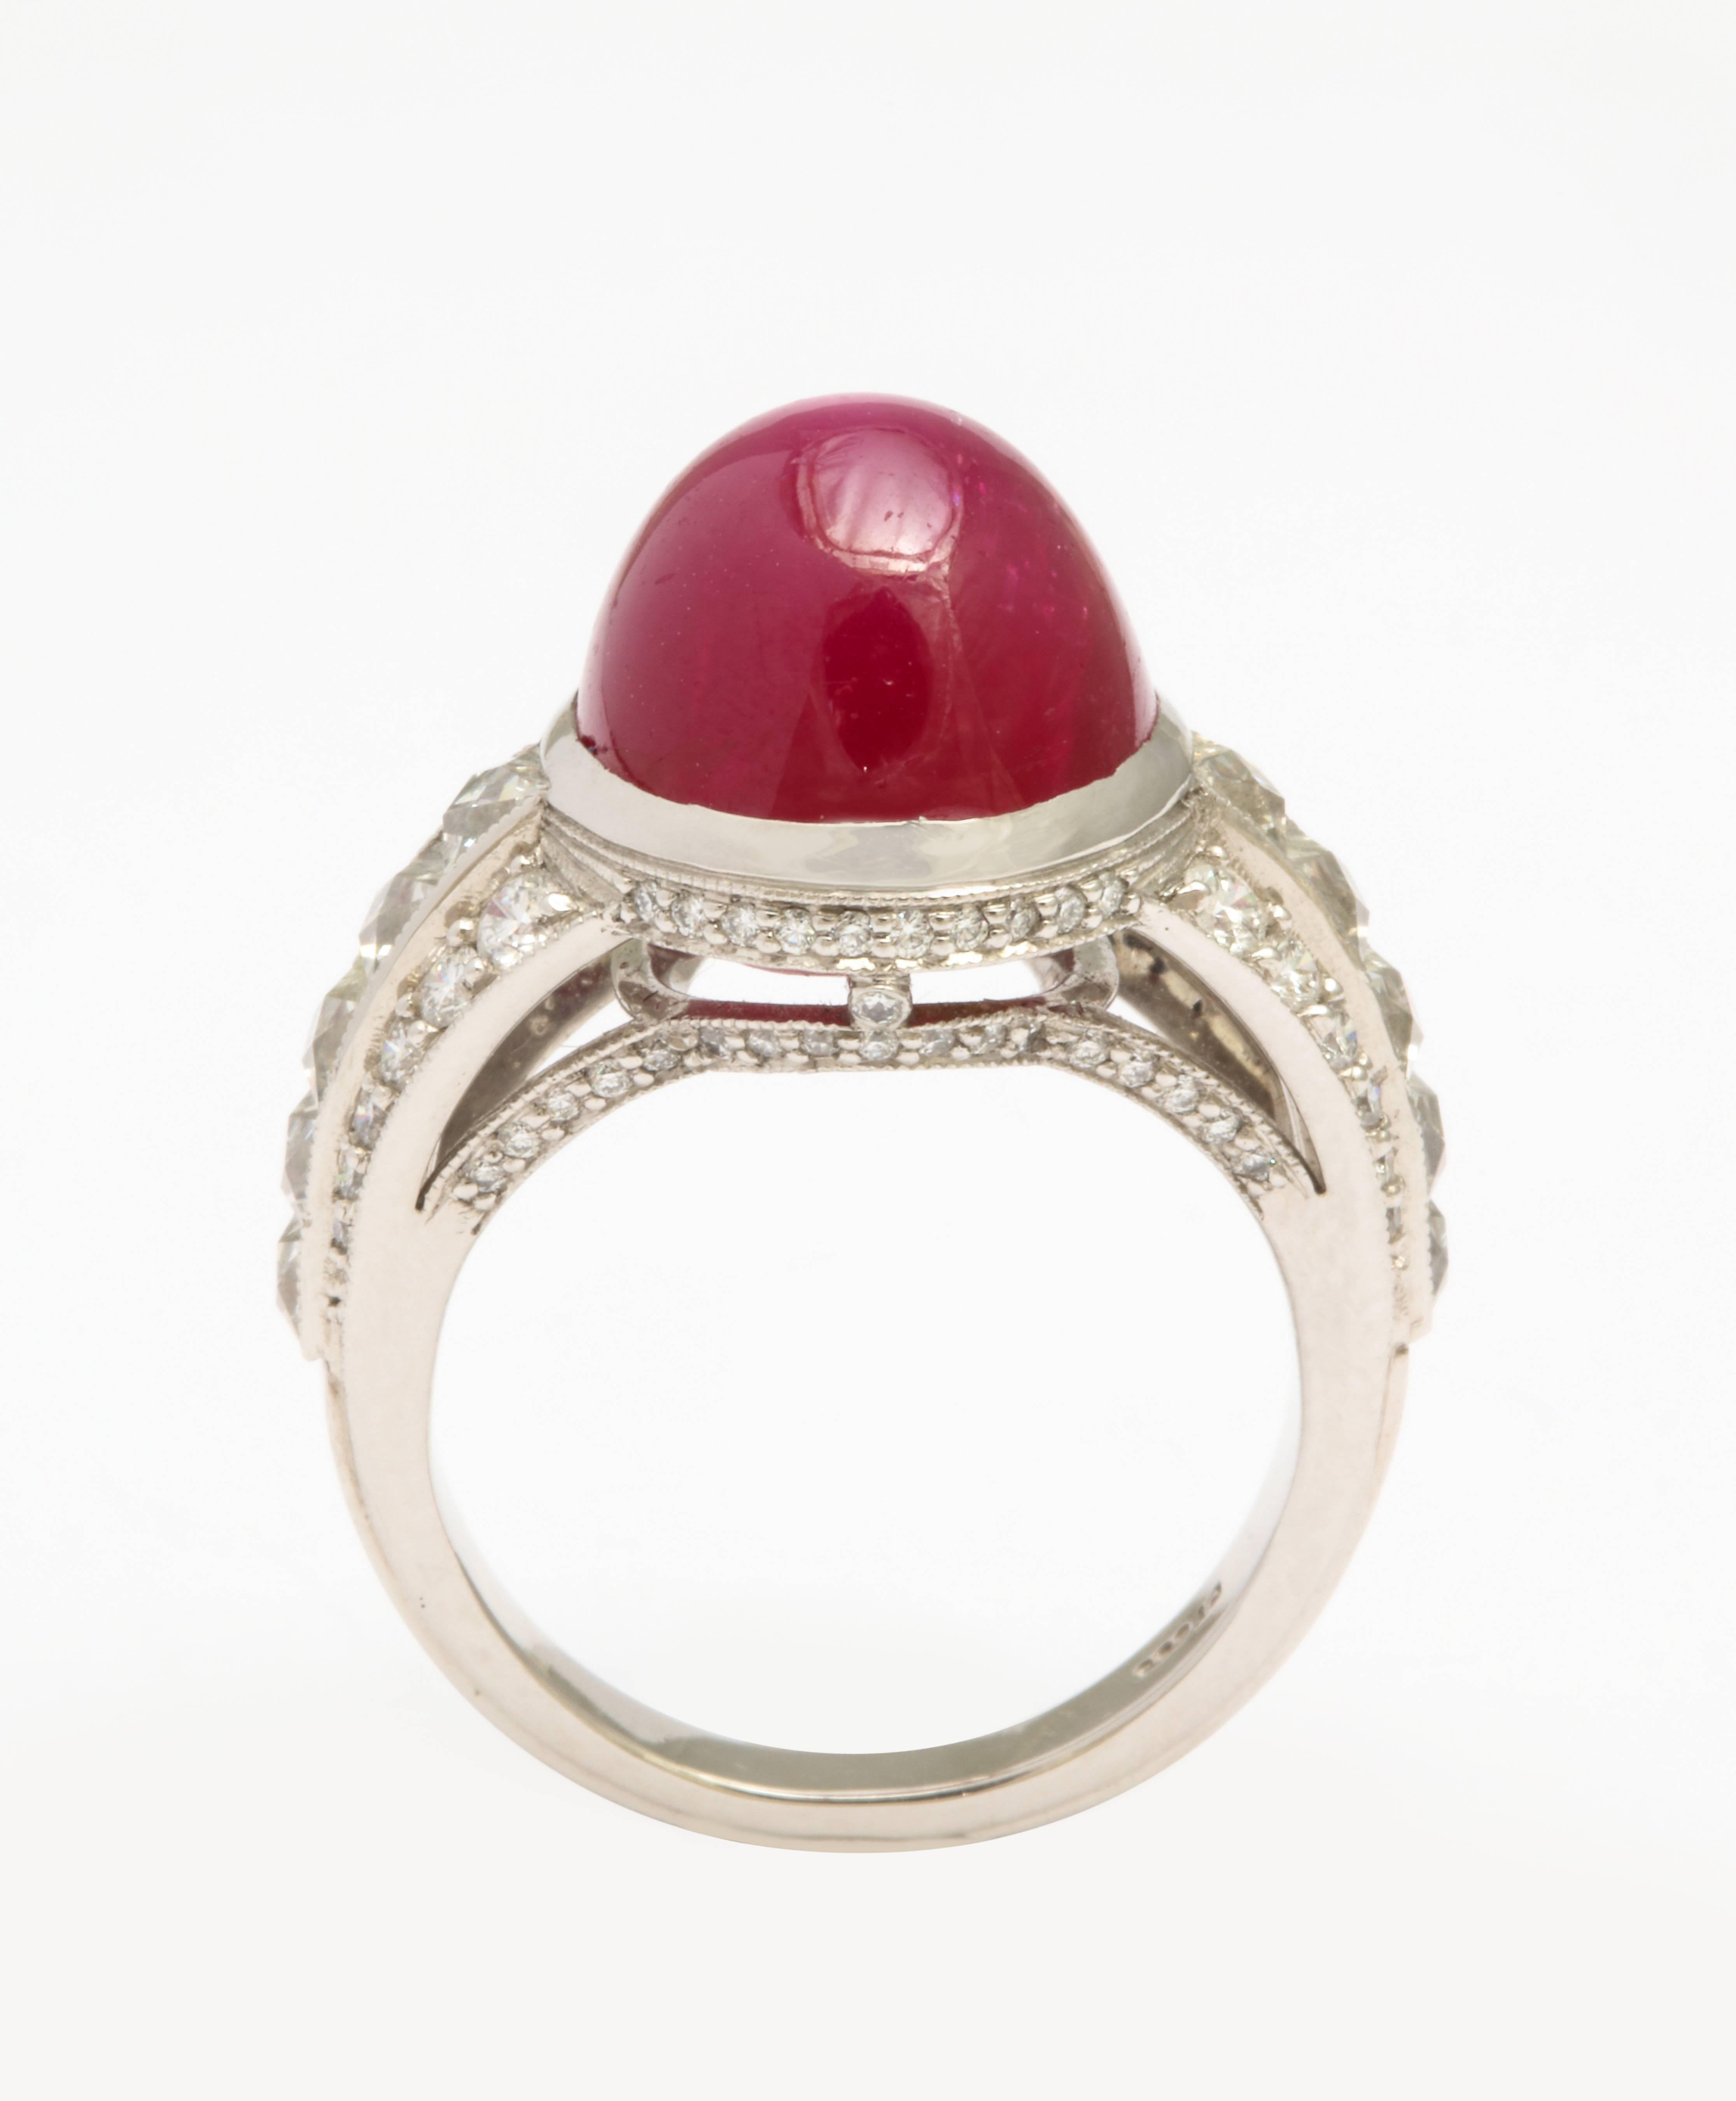 A beautiful 14.68 carat cabochon Burma no heat ruby set in an expertly crafted ring with French cut diamonds and round brilliant cut diamonds. The ruby is accompanied by an AGL certificate. The diamonds have an estimated weight of 1.64 carats. Set